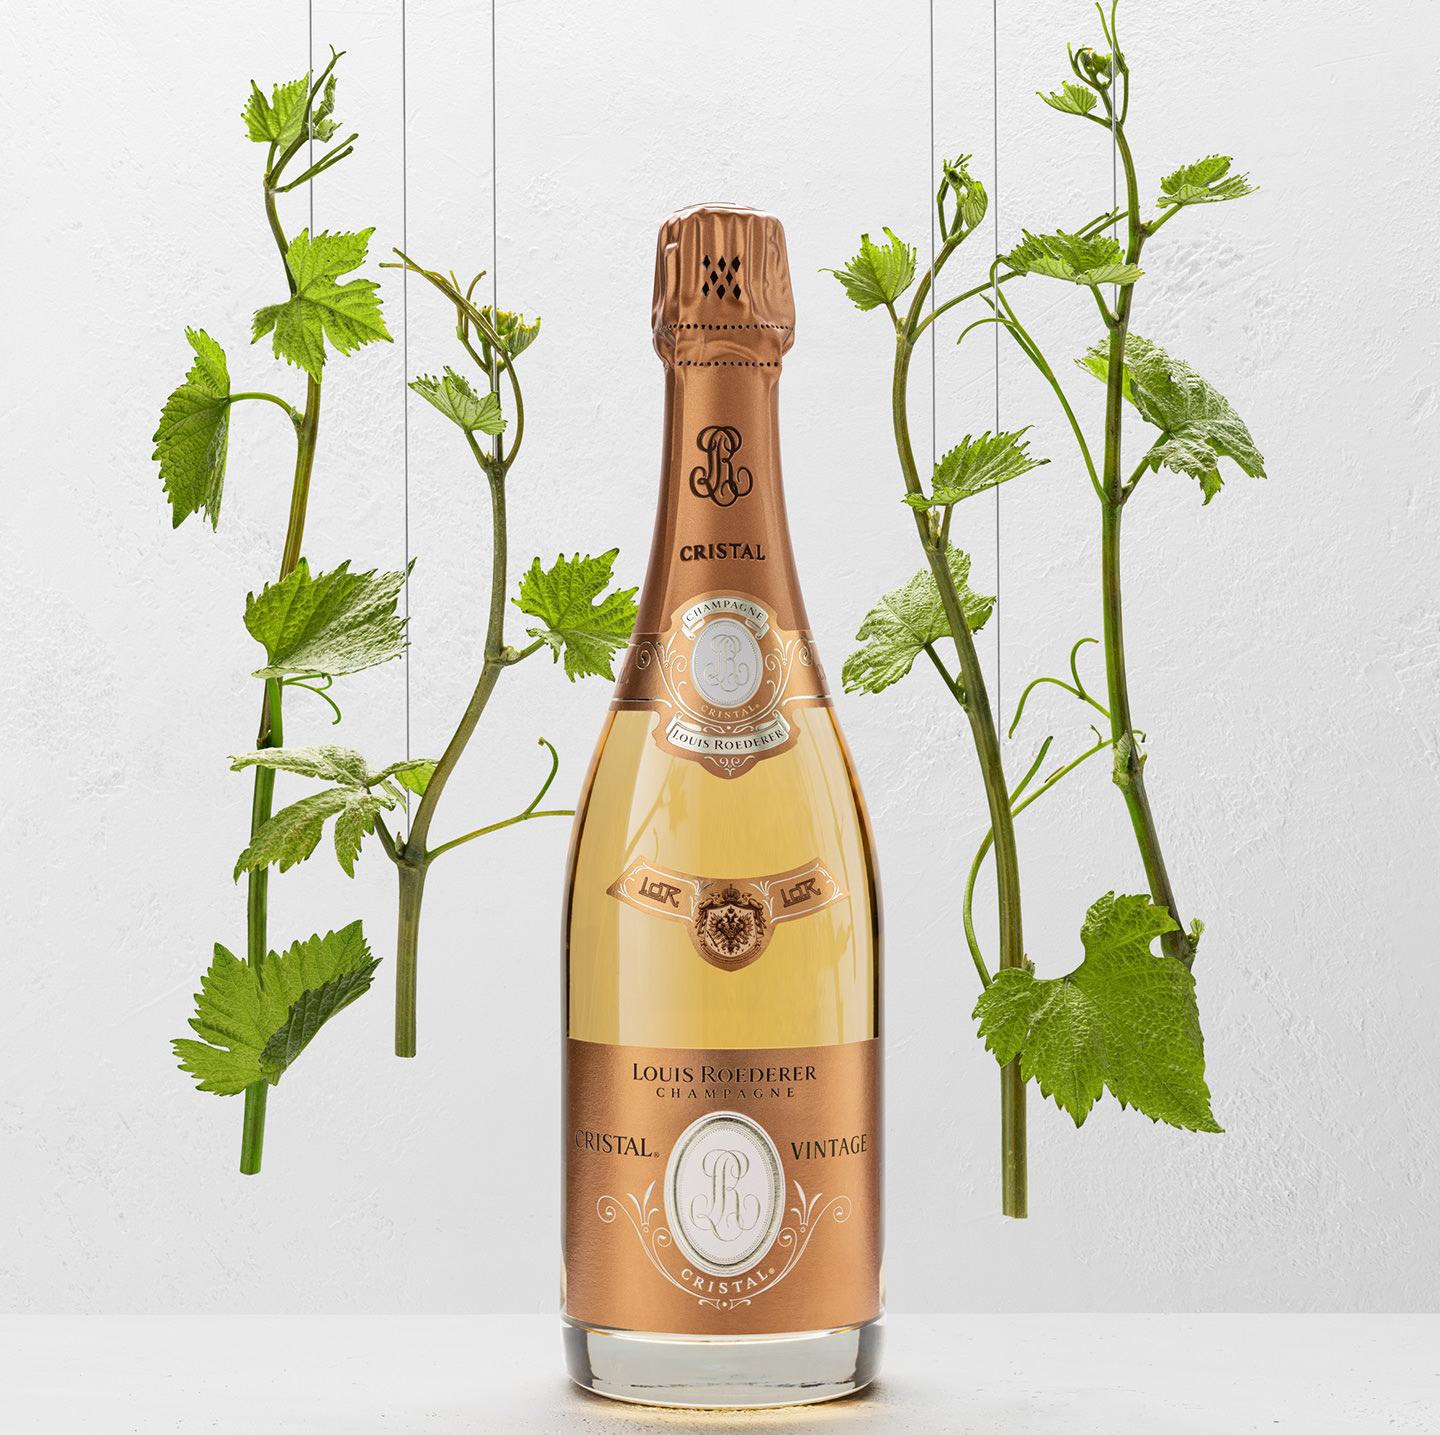 Louis Roederer Cristal Vinotheque Edition Brut Rose Millesime, Champagne